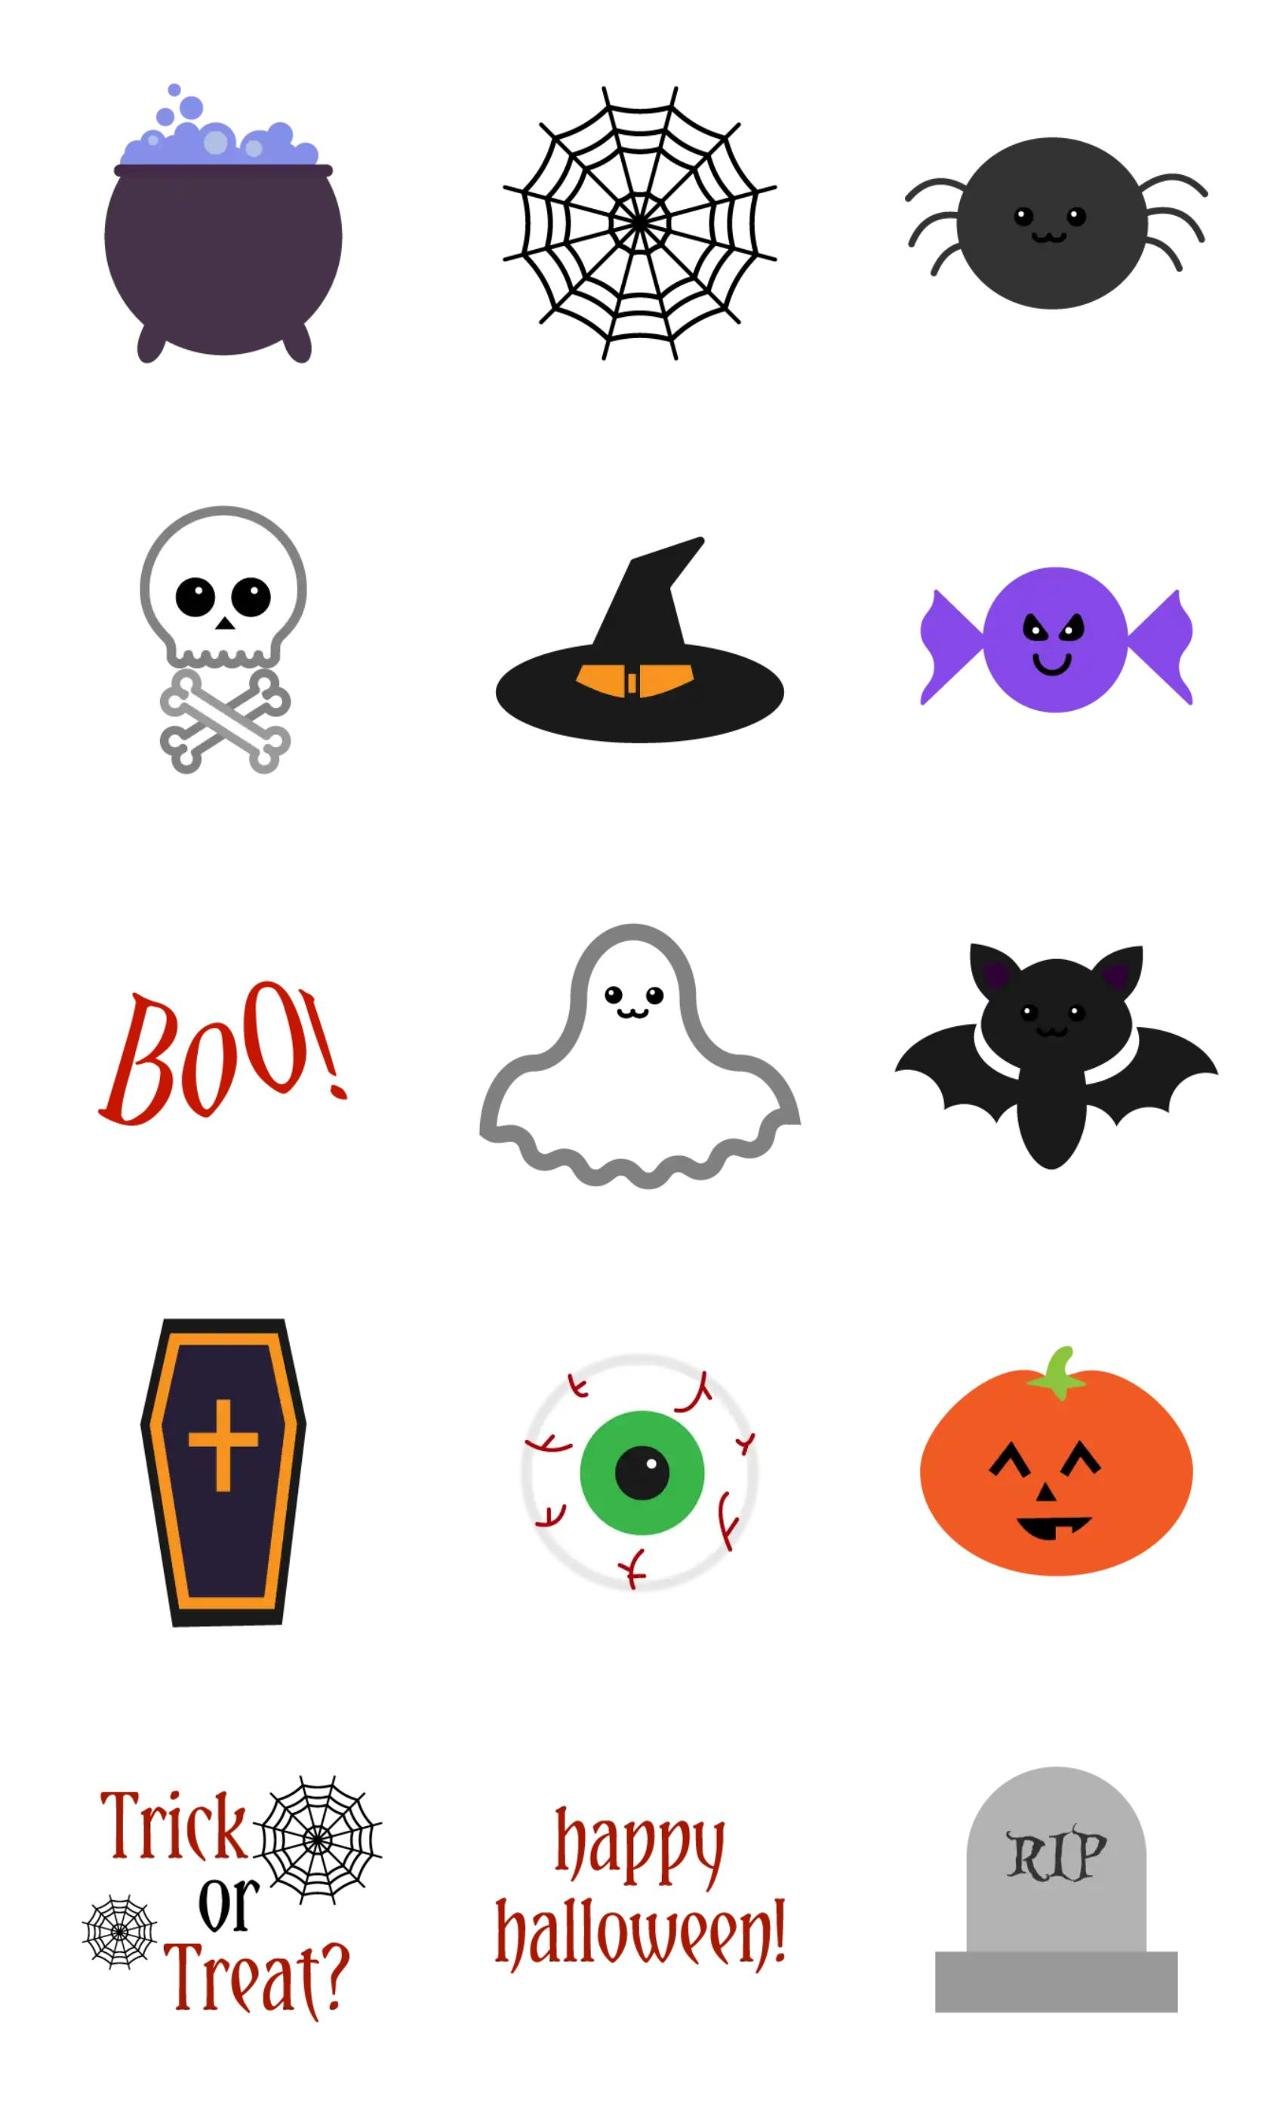 Halloween Animation/Cartoon,Halloween sticker pack for Whatsapp, Telegram, Signal, and others chatting and message apps